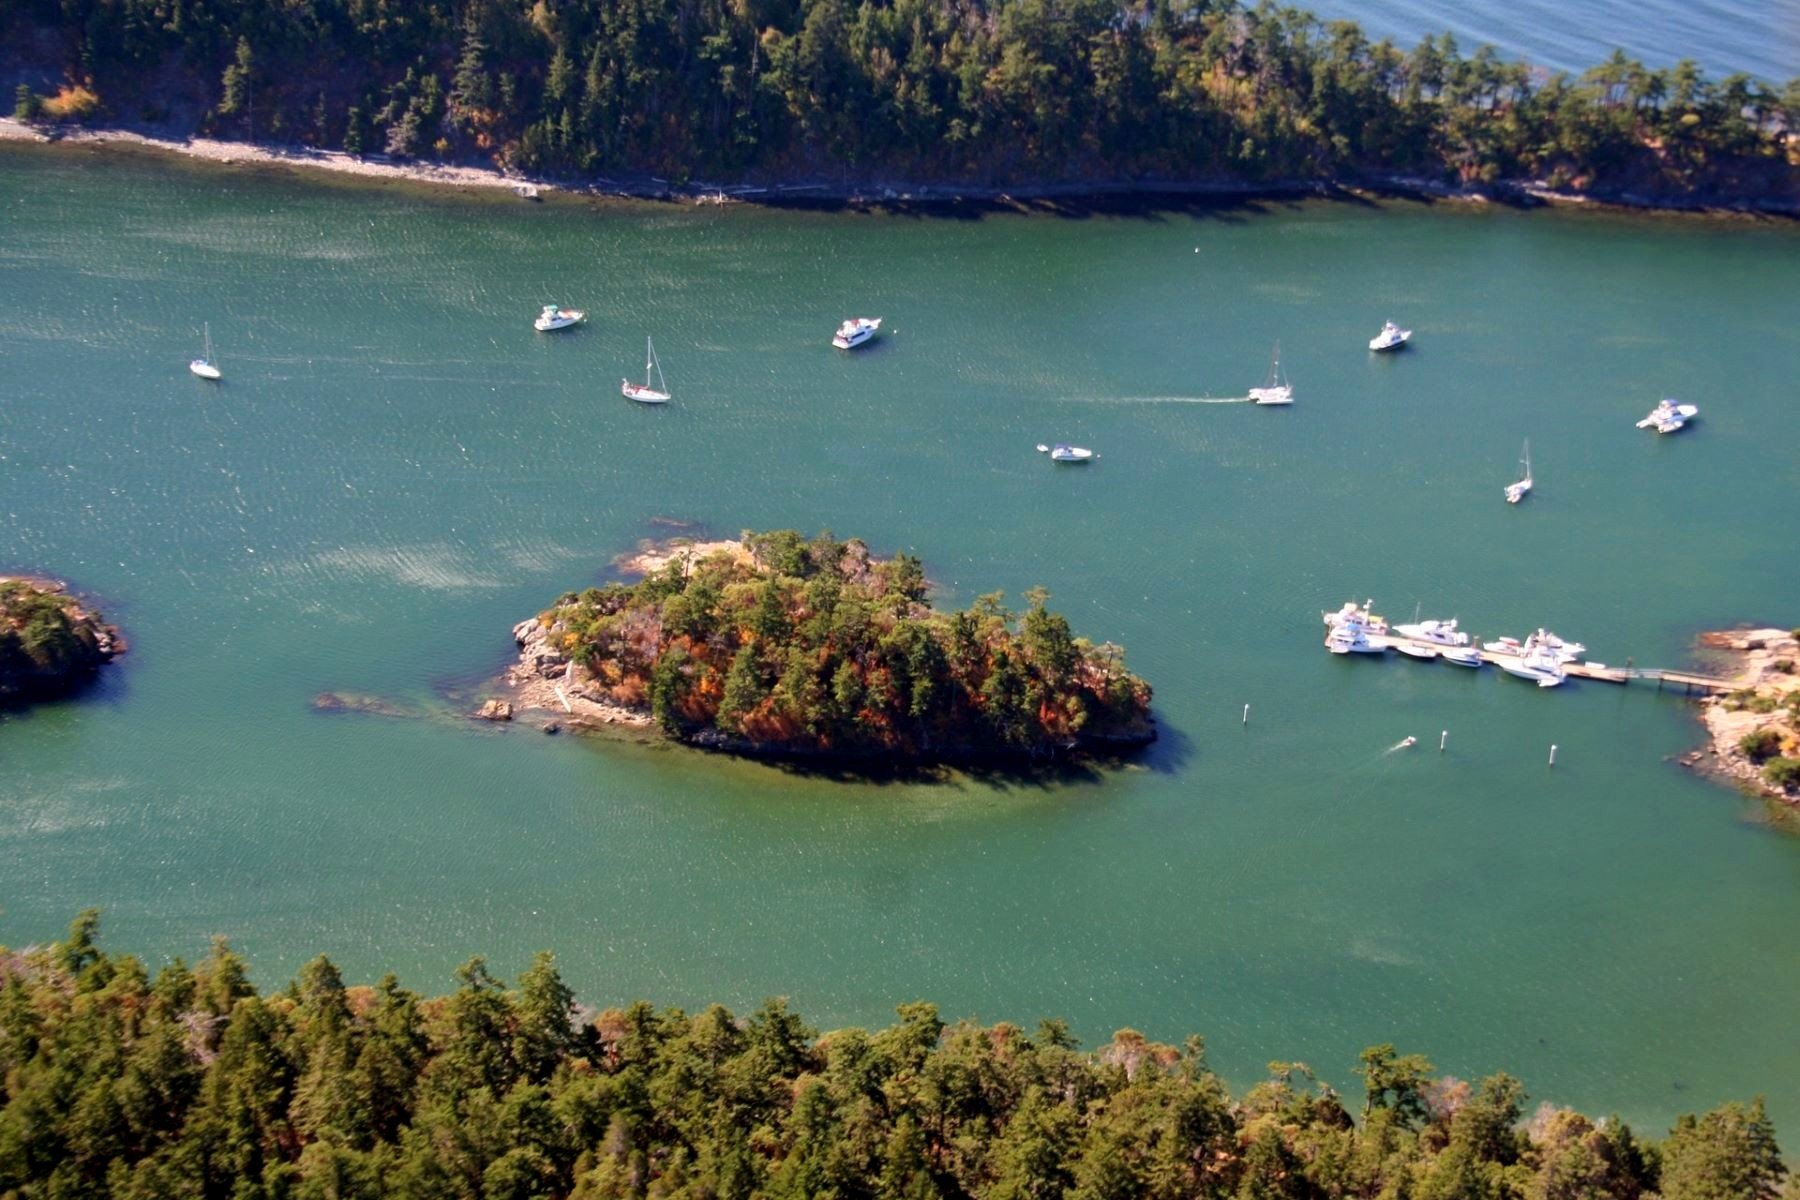 How much is it to buy a private island: Private Island in Eastsound, Washington, USA, $795,000.